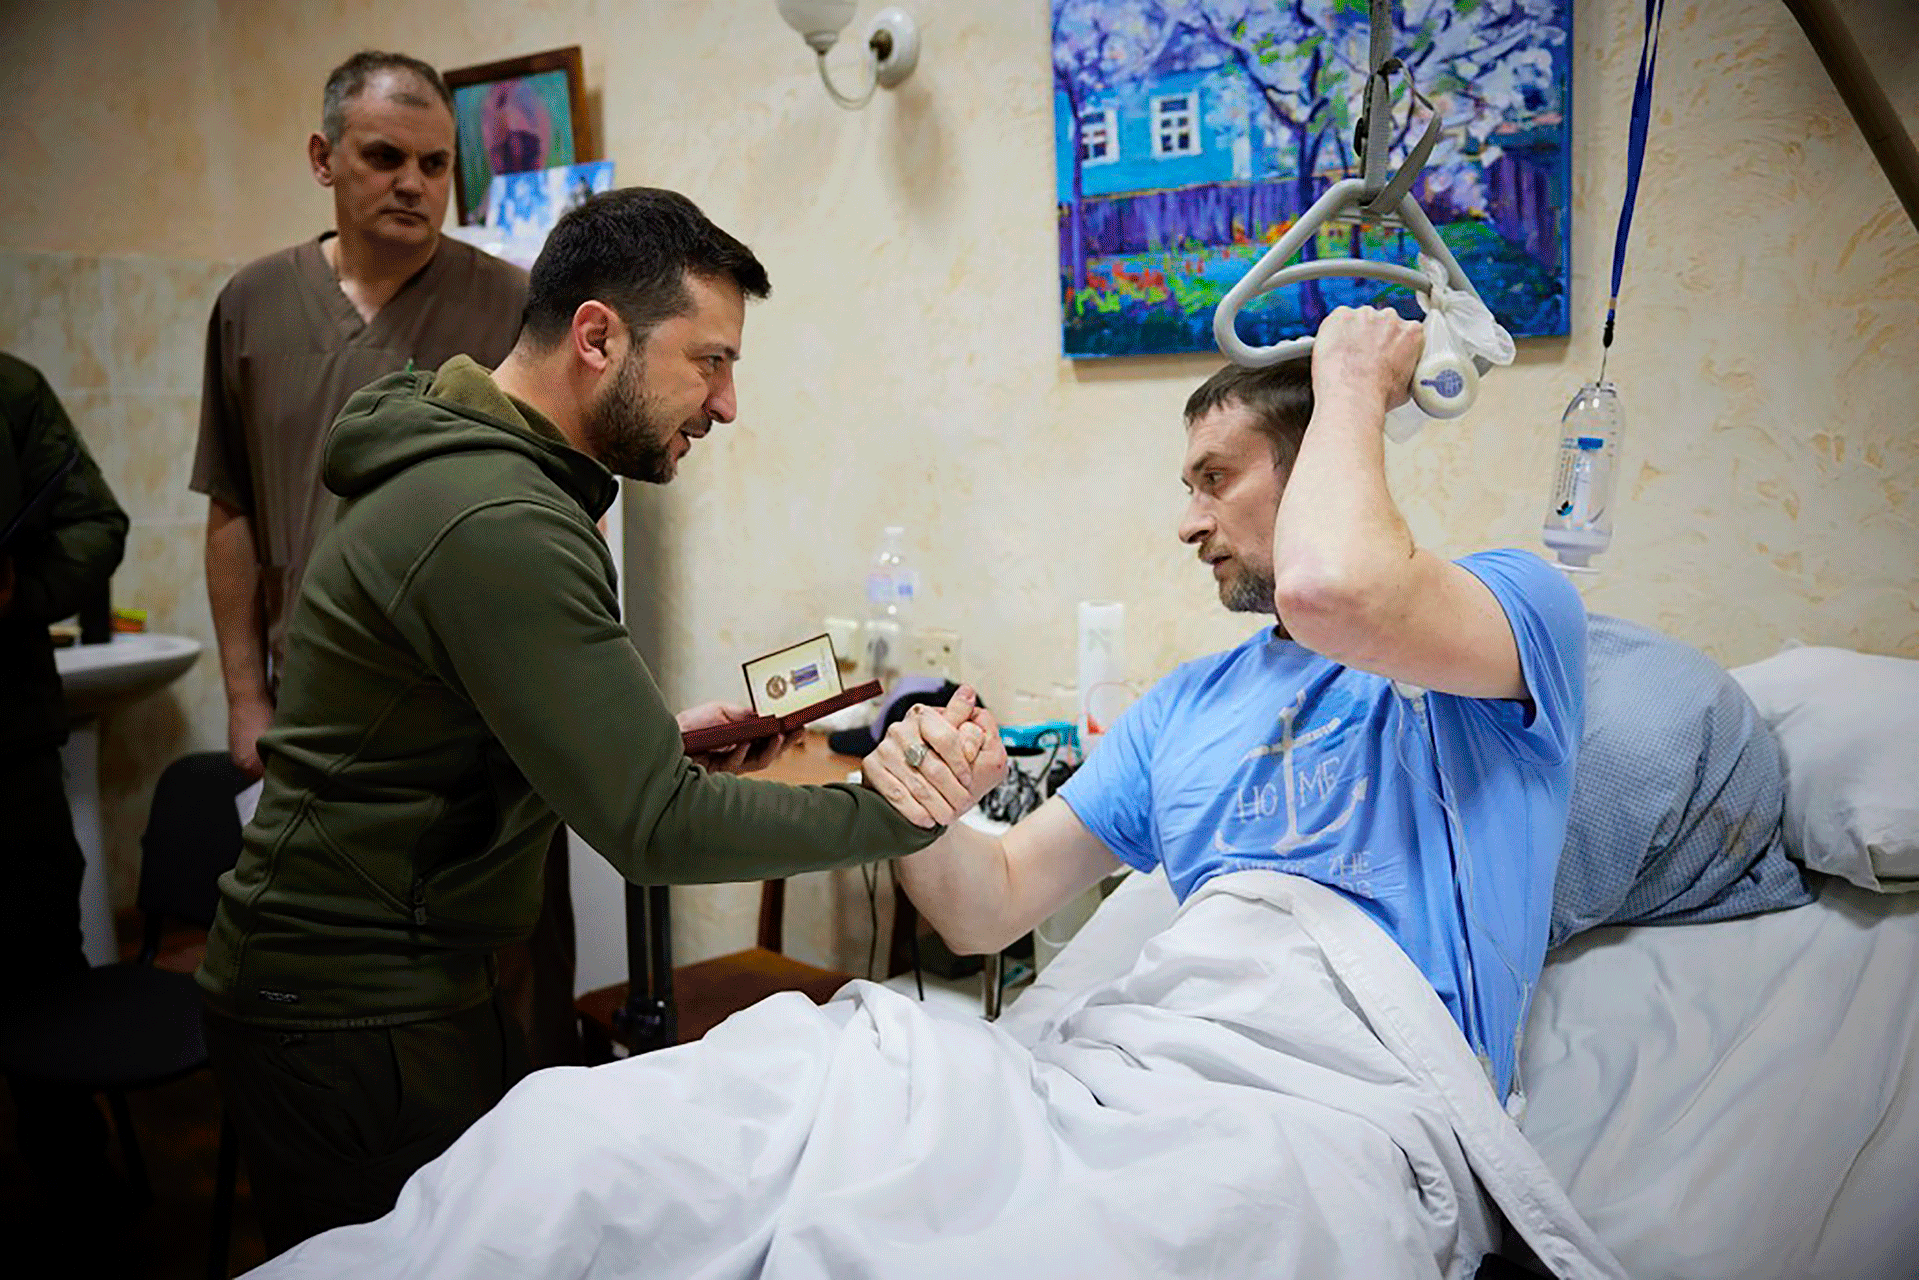 In this photo provided by Ukraine's Presidential Press Office on Sunday, March 13, 2022, President Volodymyr Zelenskyy, center, shakes hands with an injured soldier during his visit to a hospital in Kyiv, Ukraine.